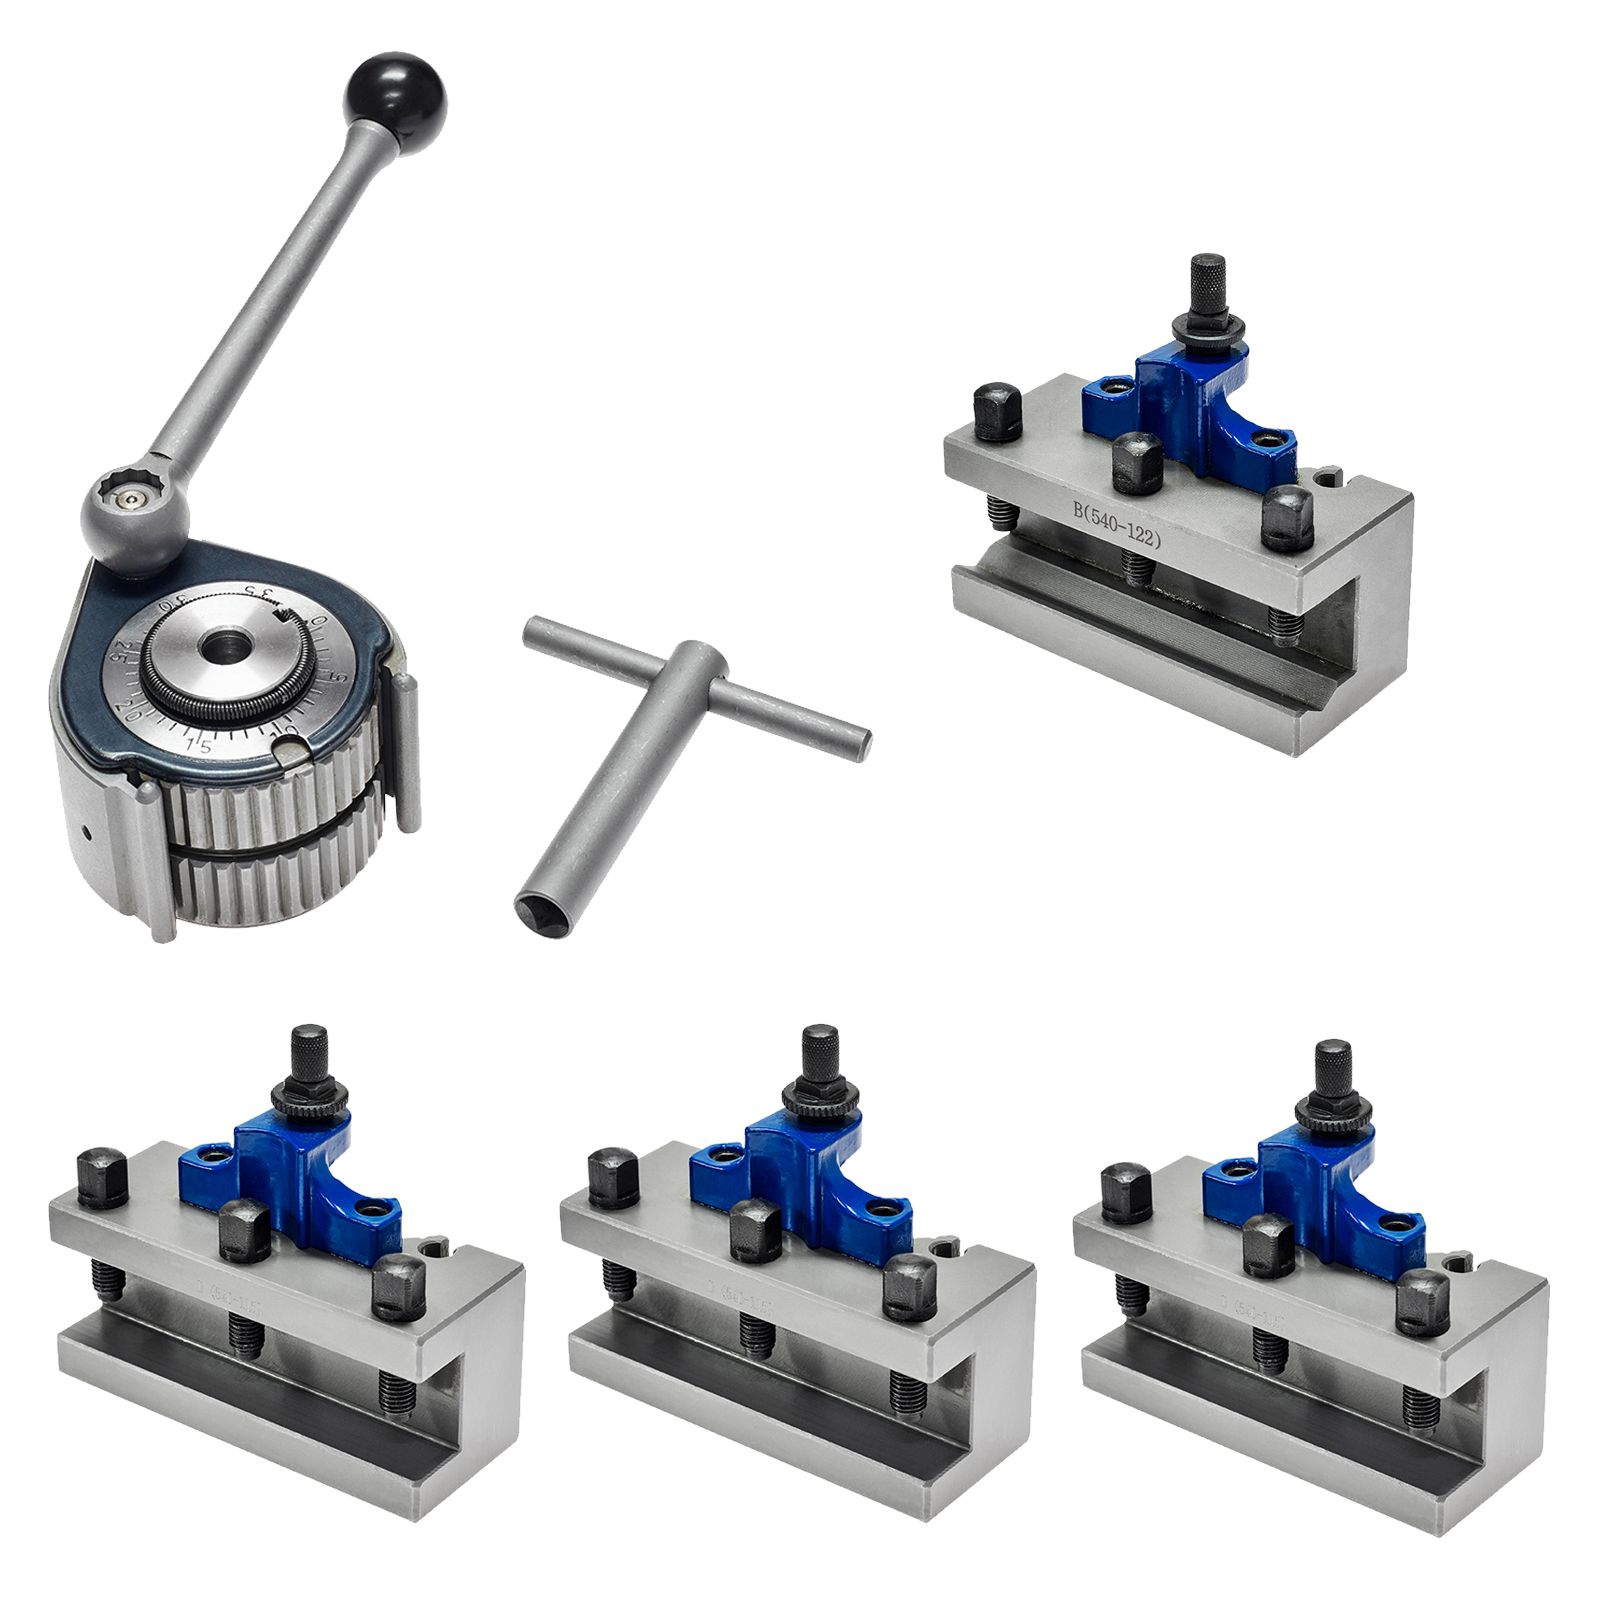 Quick Change Tool Post with 4 holders